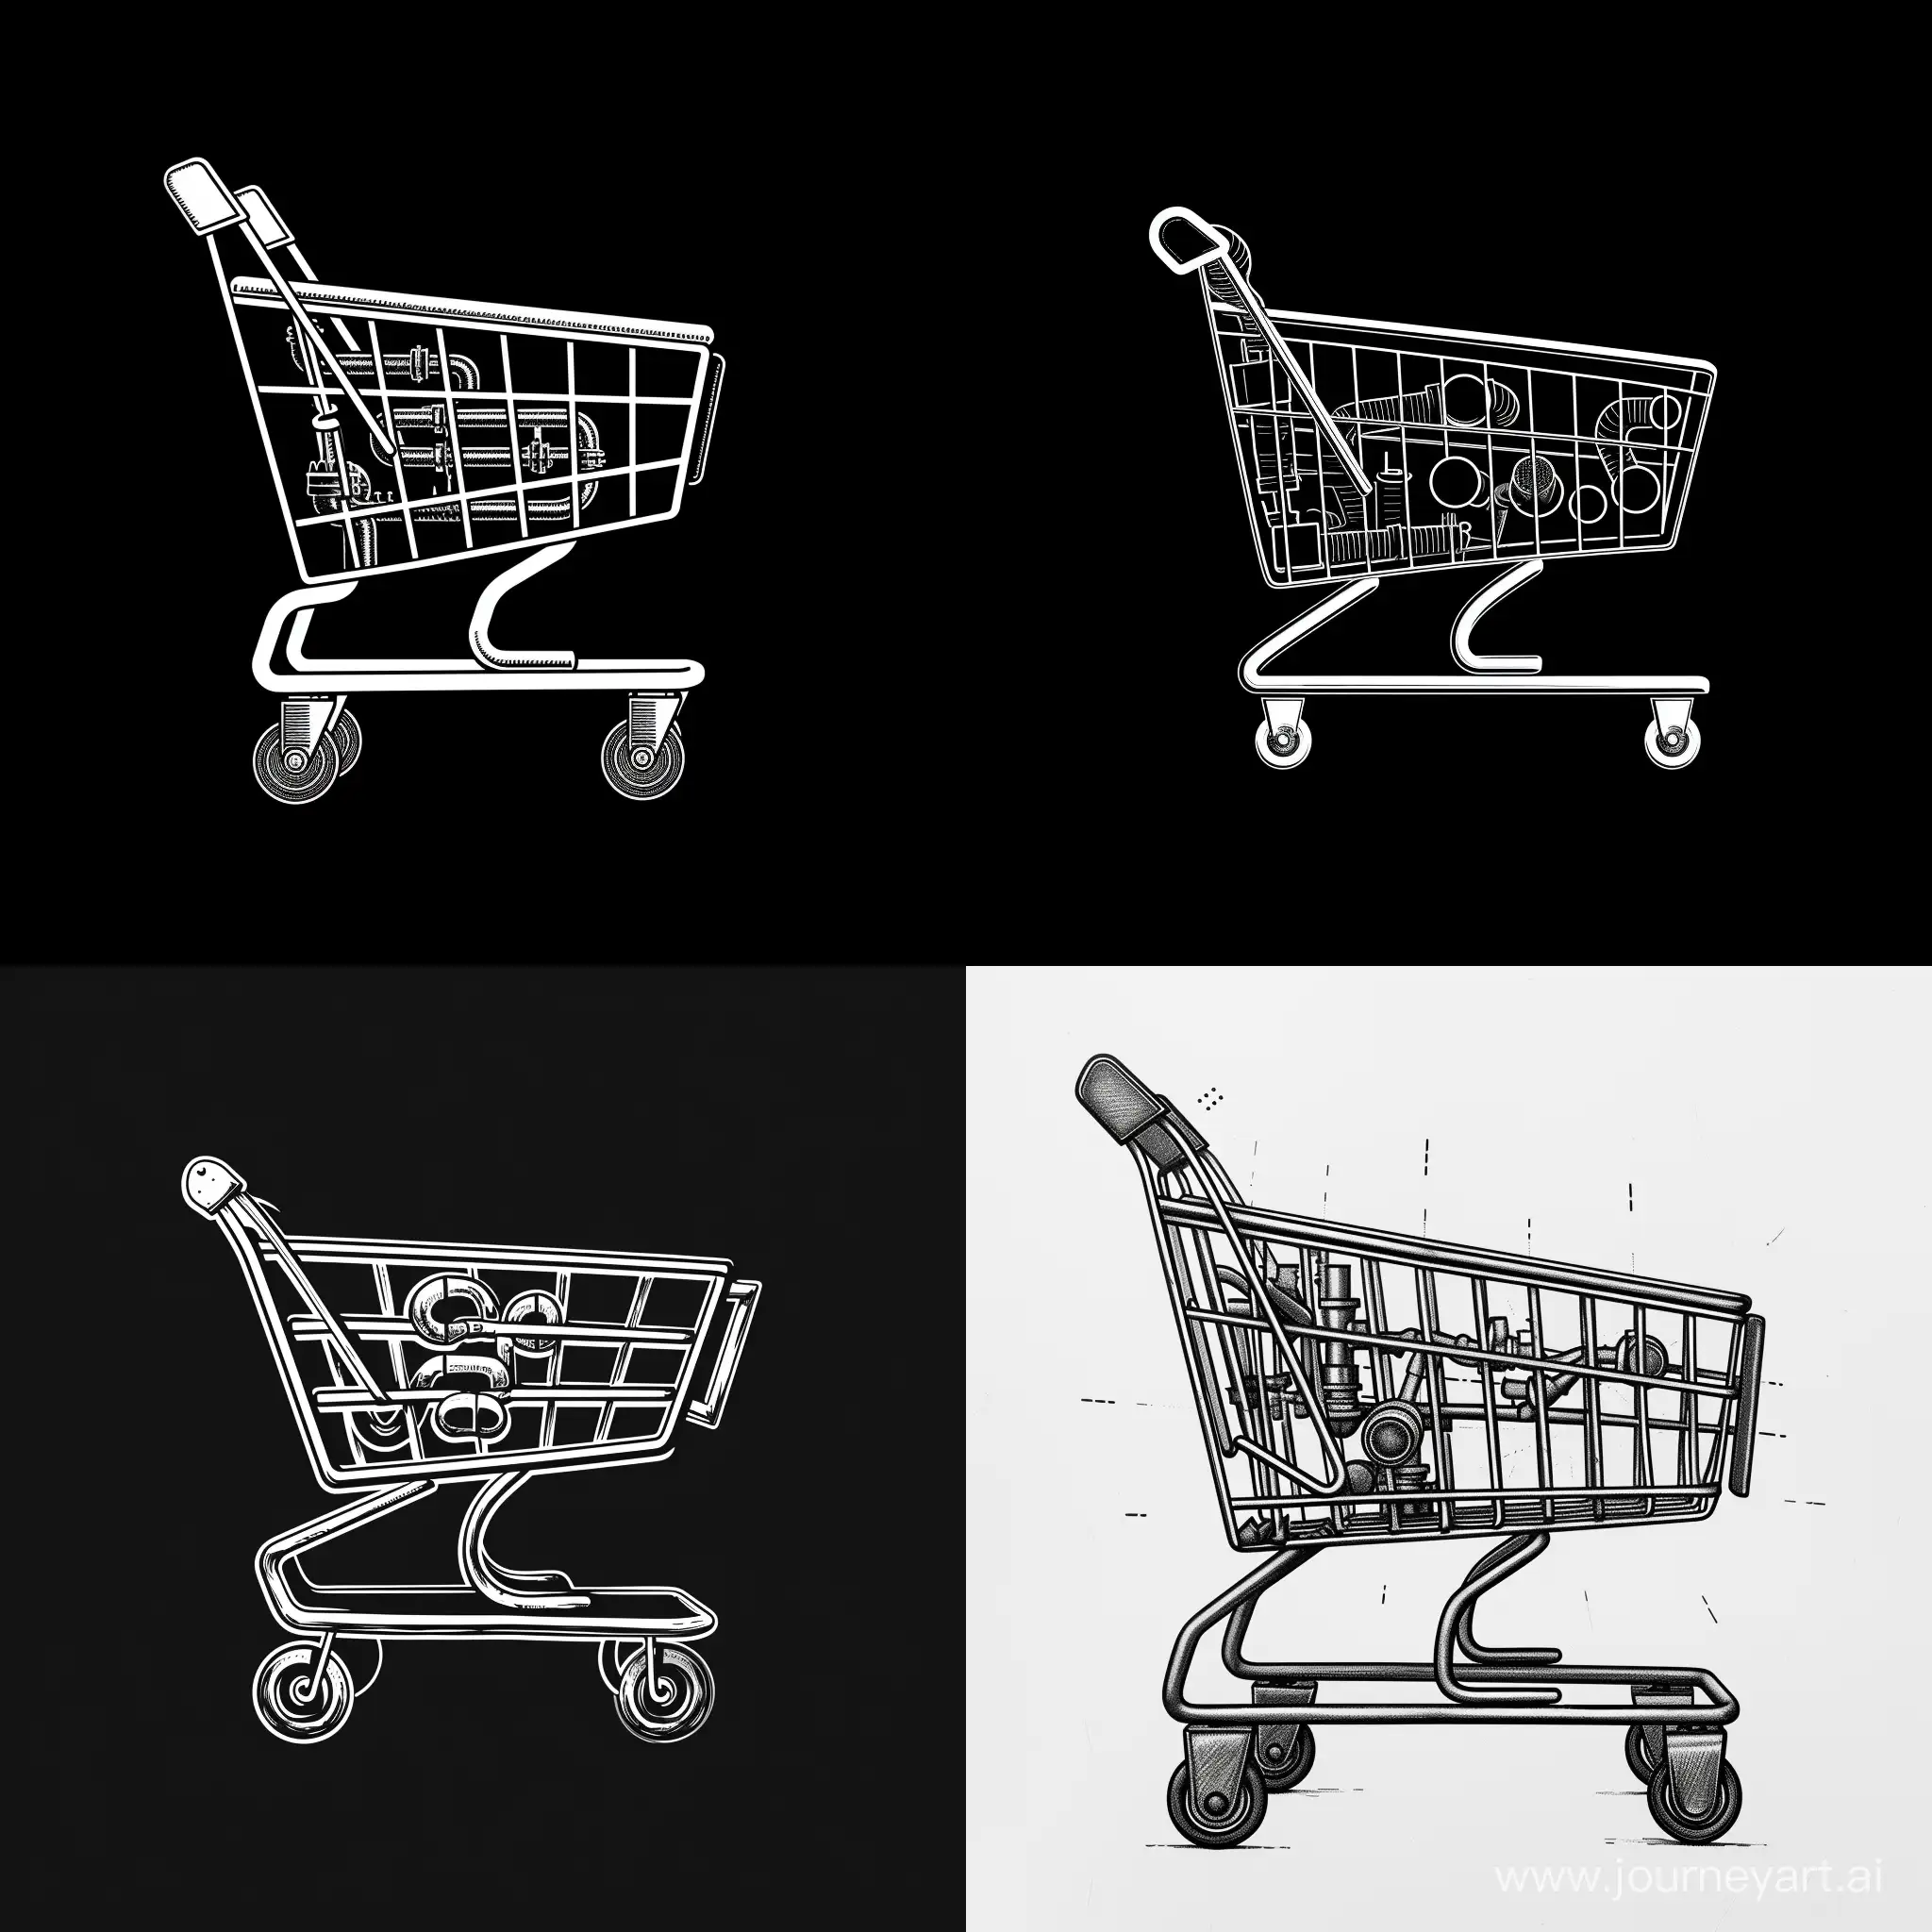 2D Logo Design of A Shopping Cart, Pipes in the Cart, Minimalism, B&W, Vectorize, Illustration Software, High Precision --v 6.0